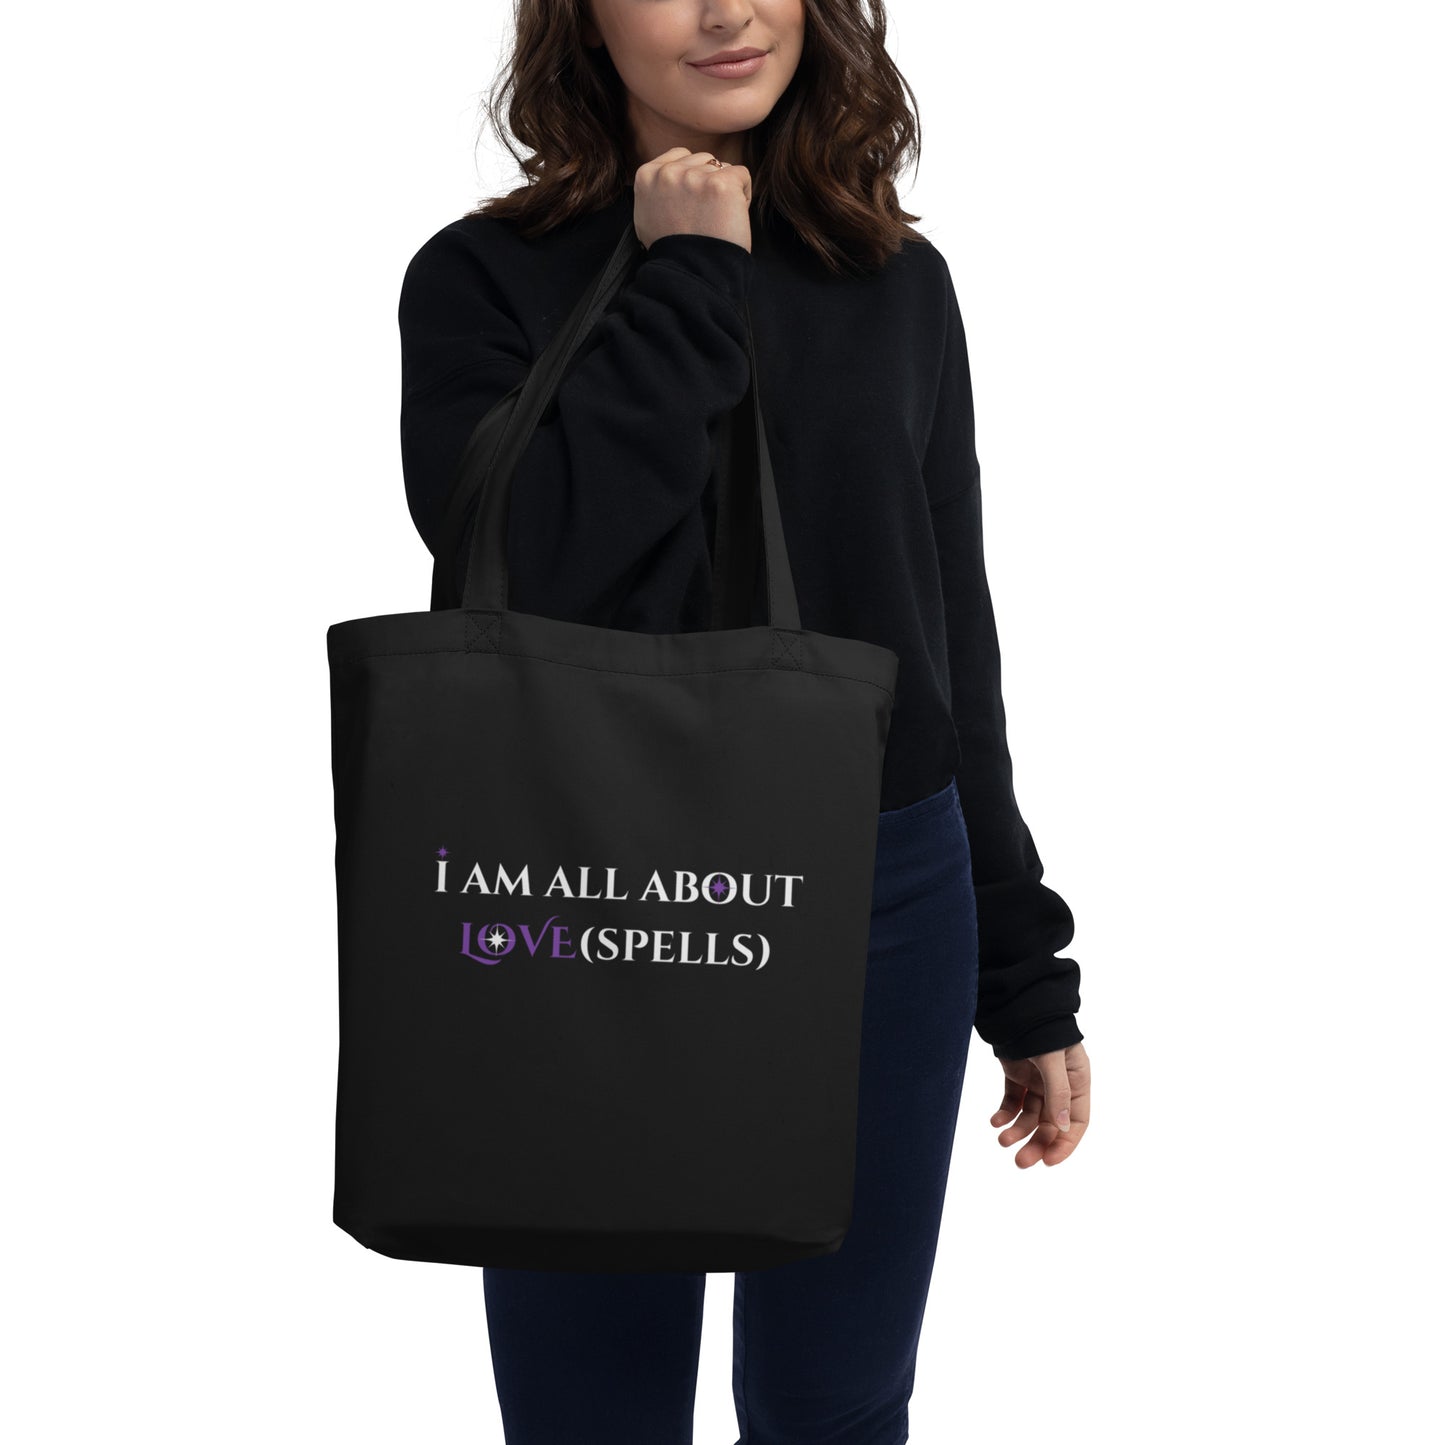 I am all about LOVE(spells) Black Eco Tote Bag